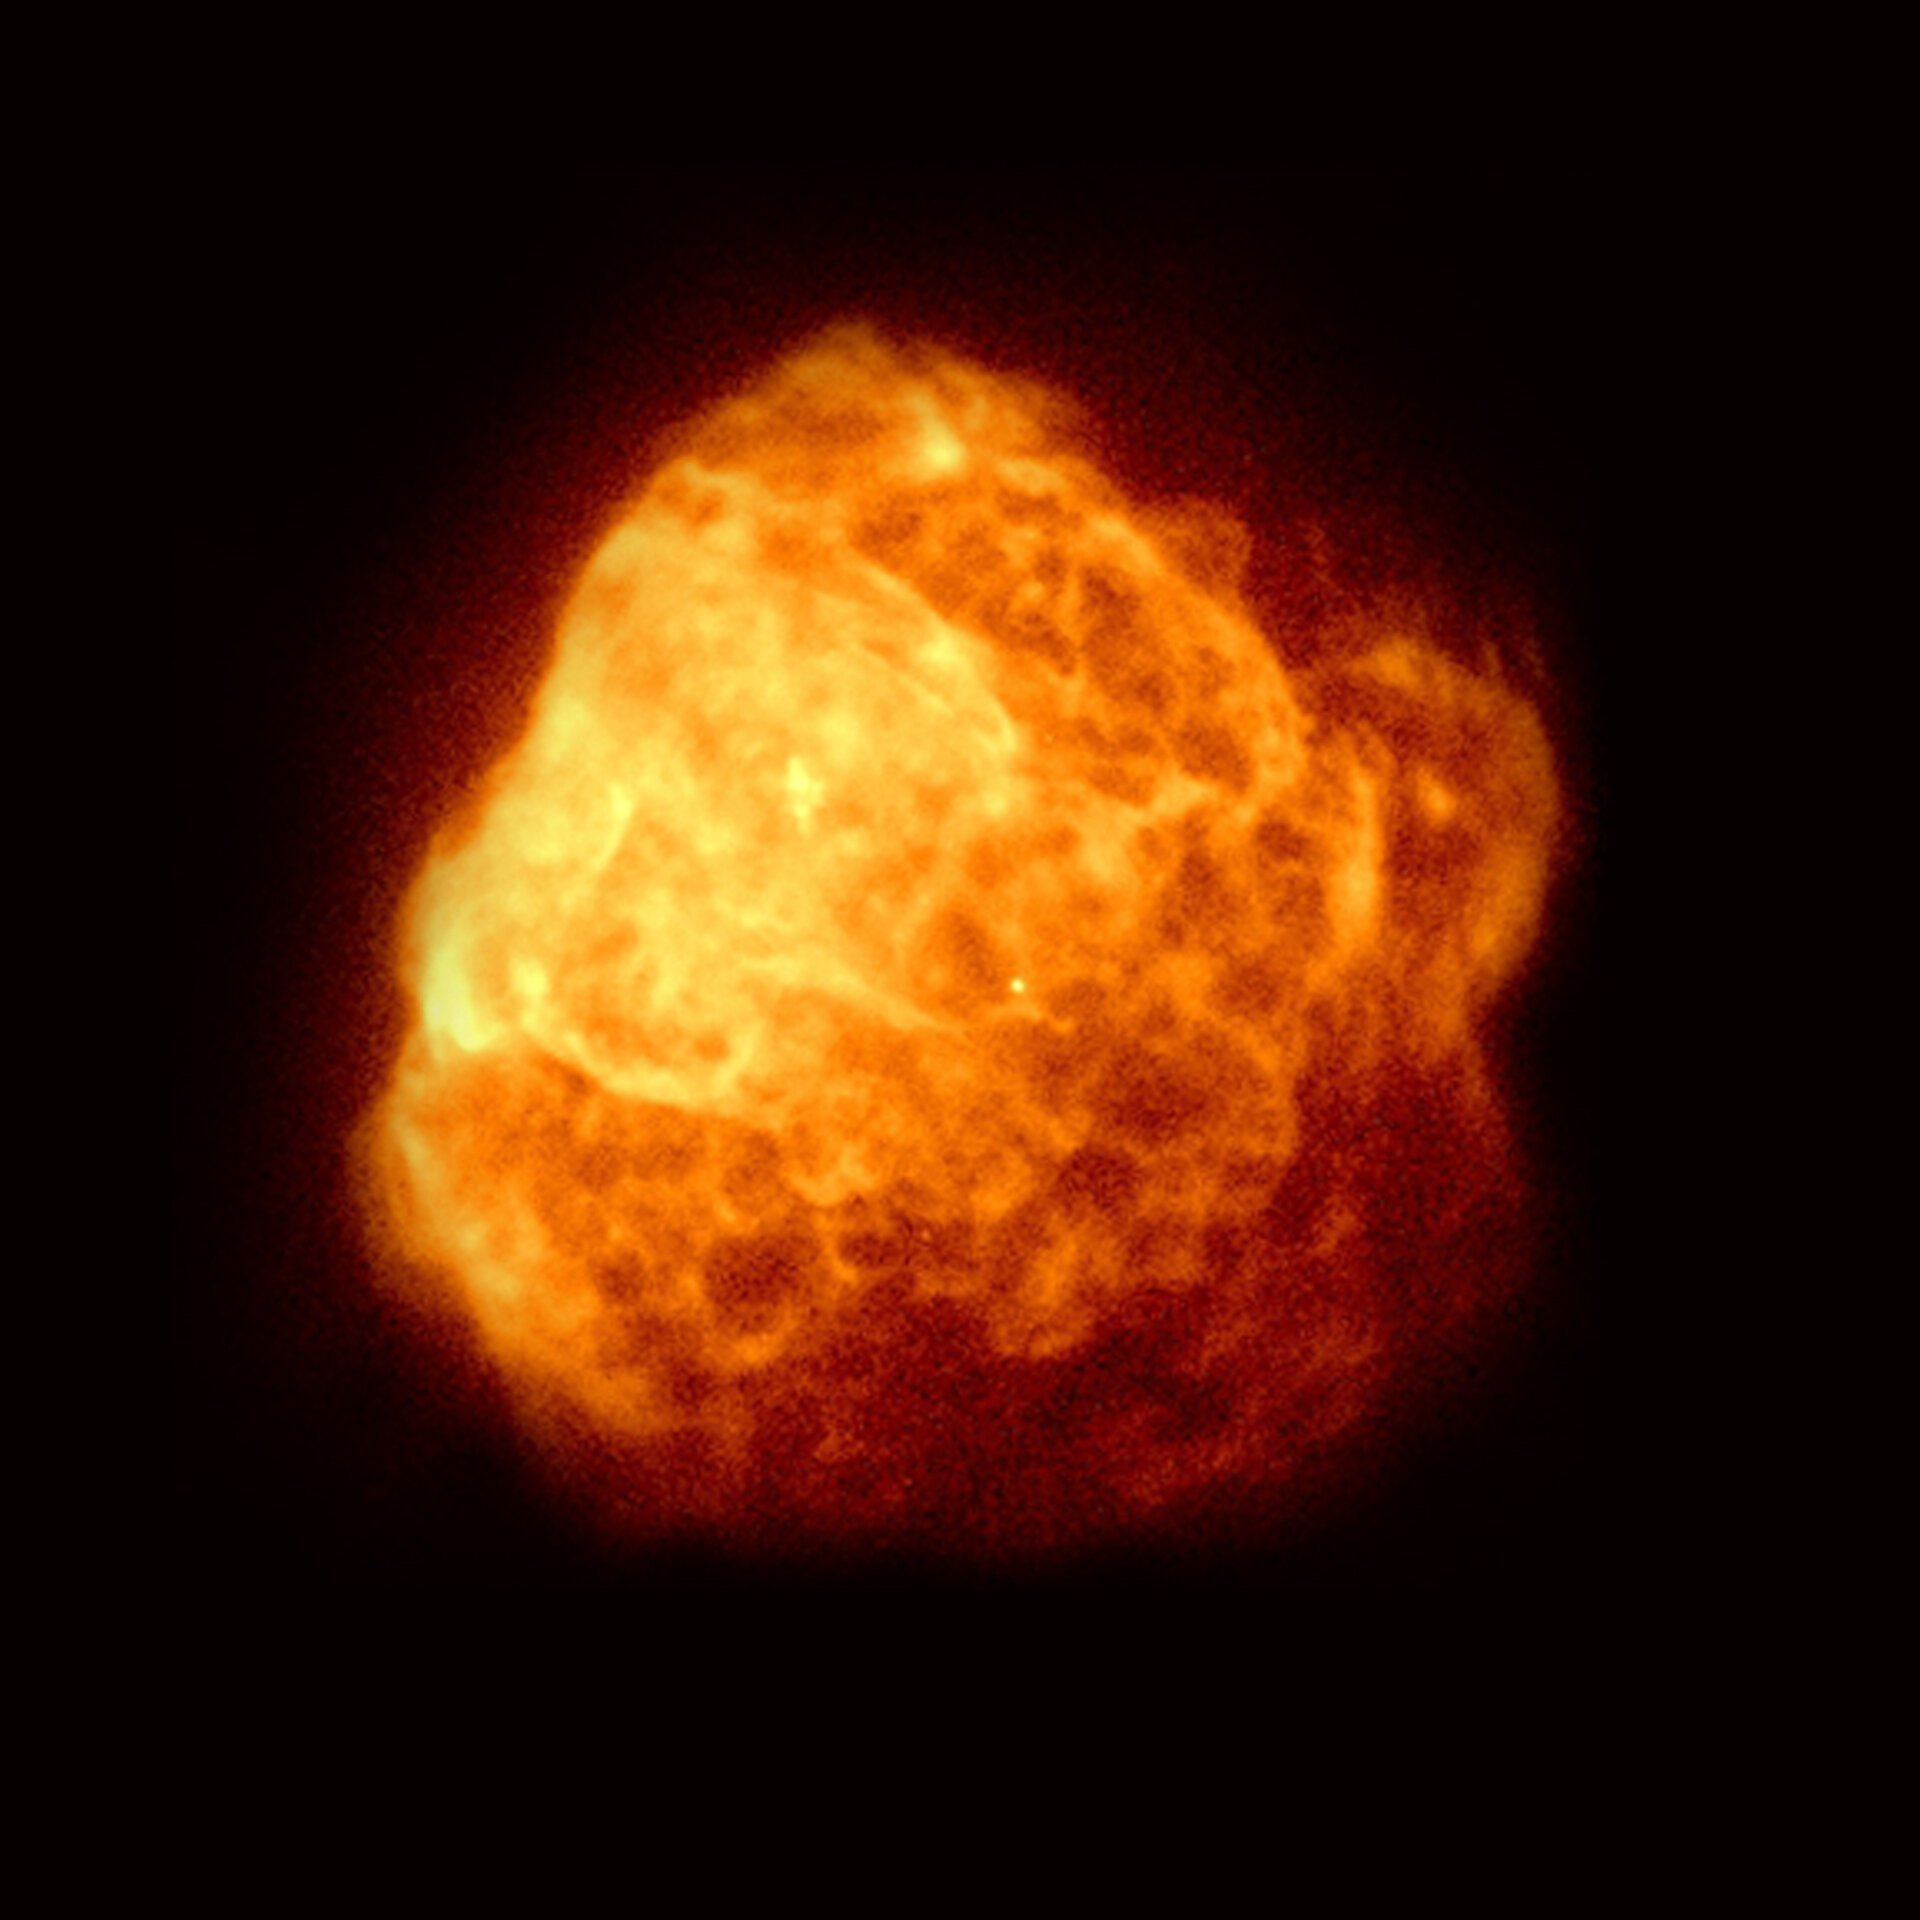 A view of a yellow and orange, slightly hazy cloud in space.